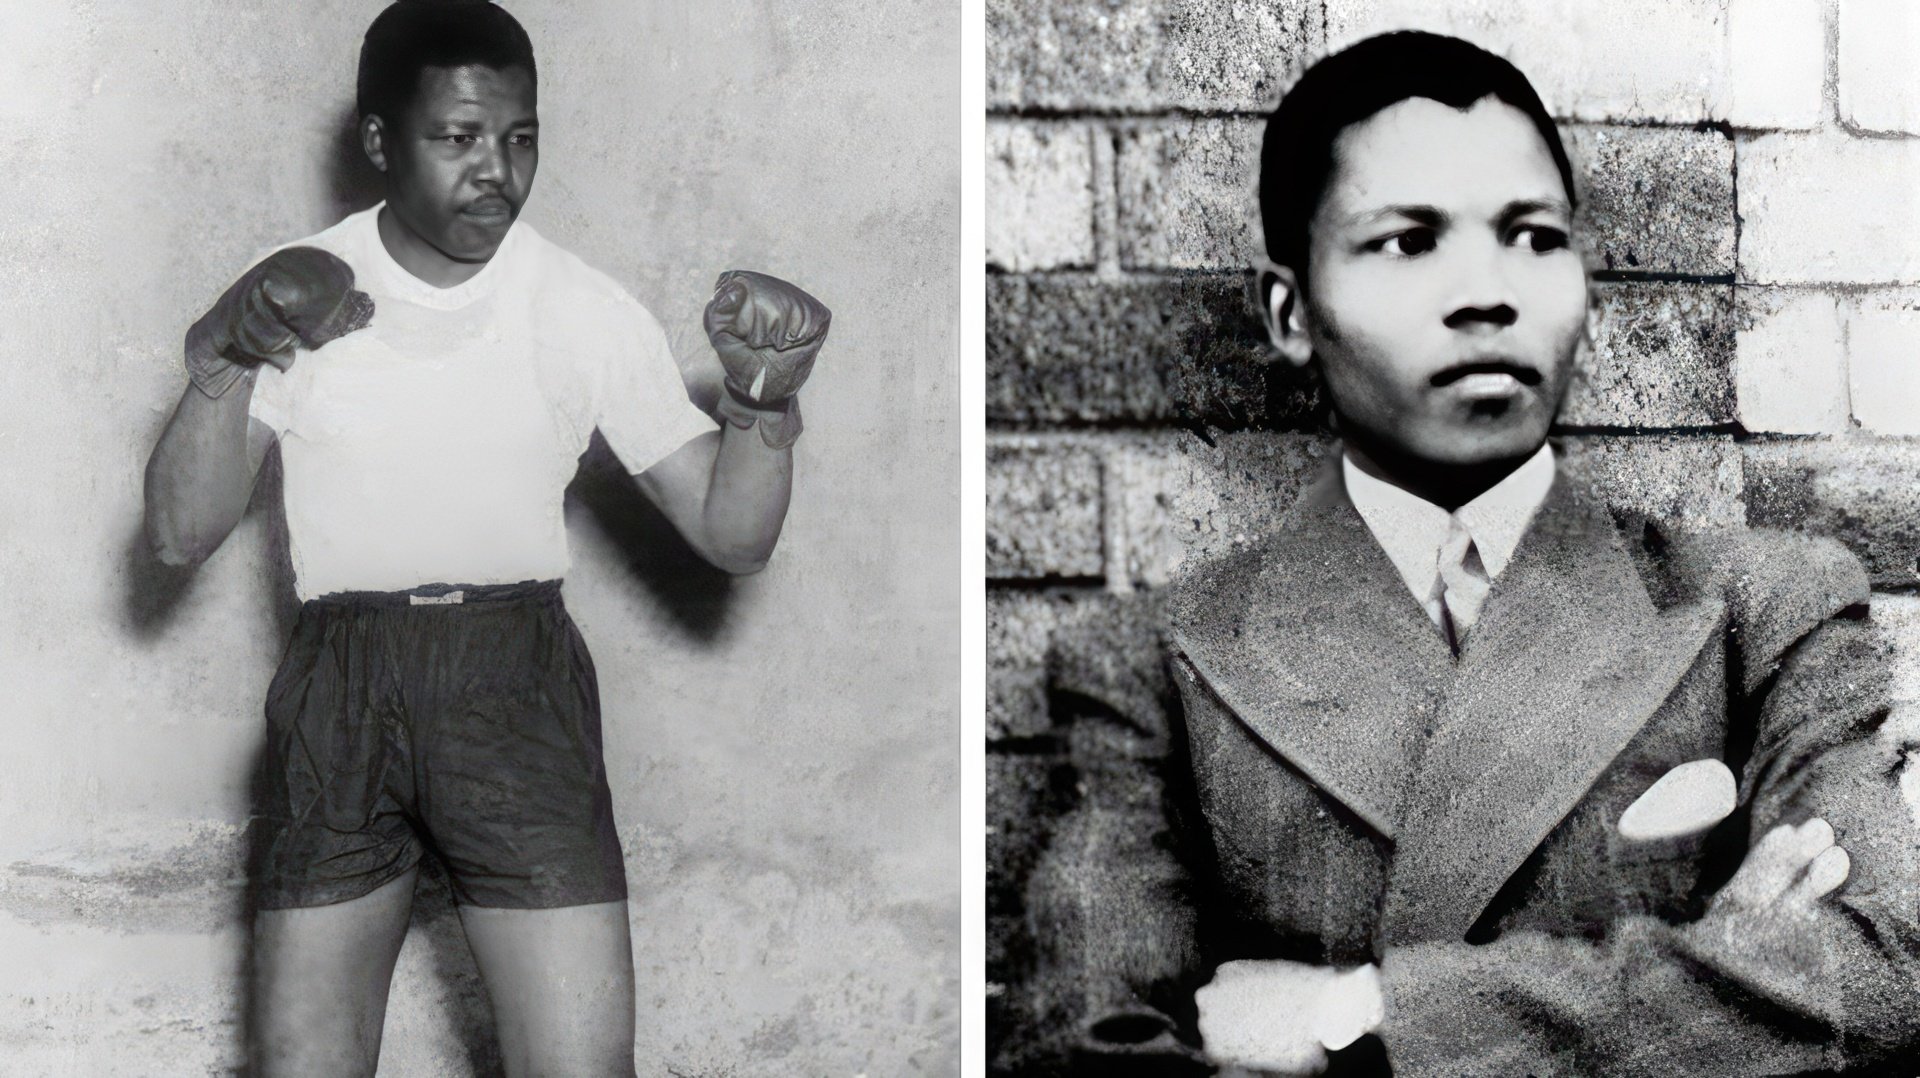 Nelson Mandela in his youth